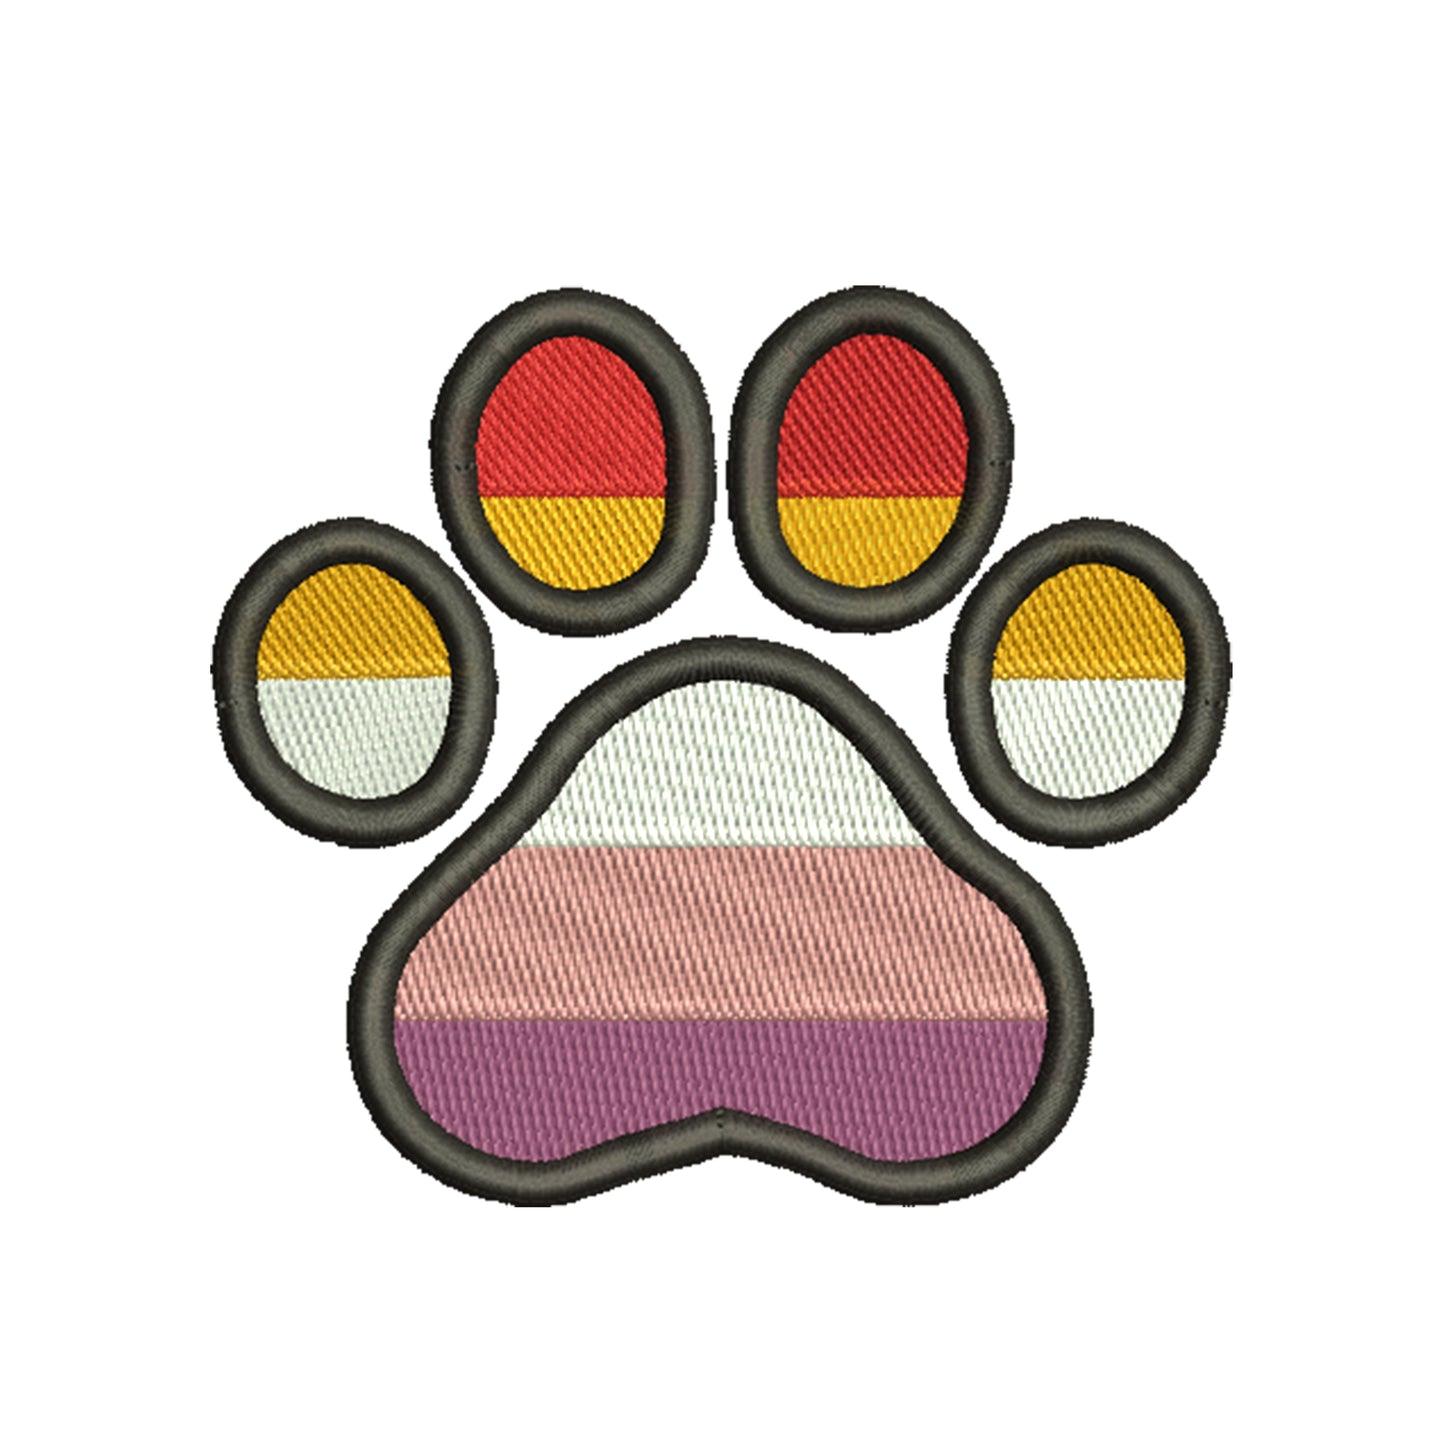 Paw embroidery designs lesbian pride flag - 1010047